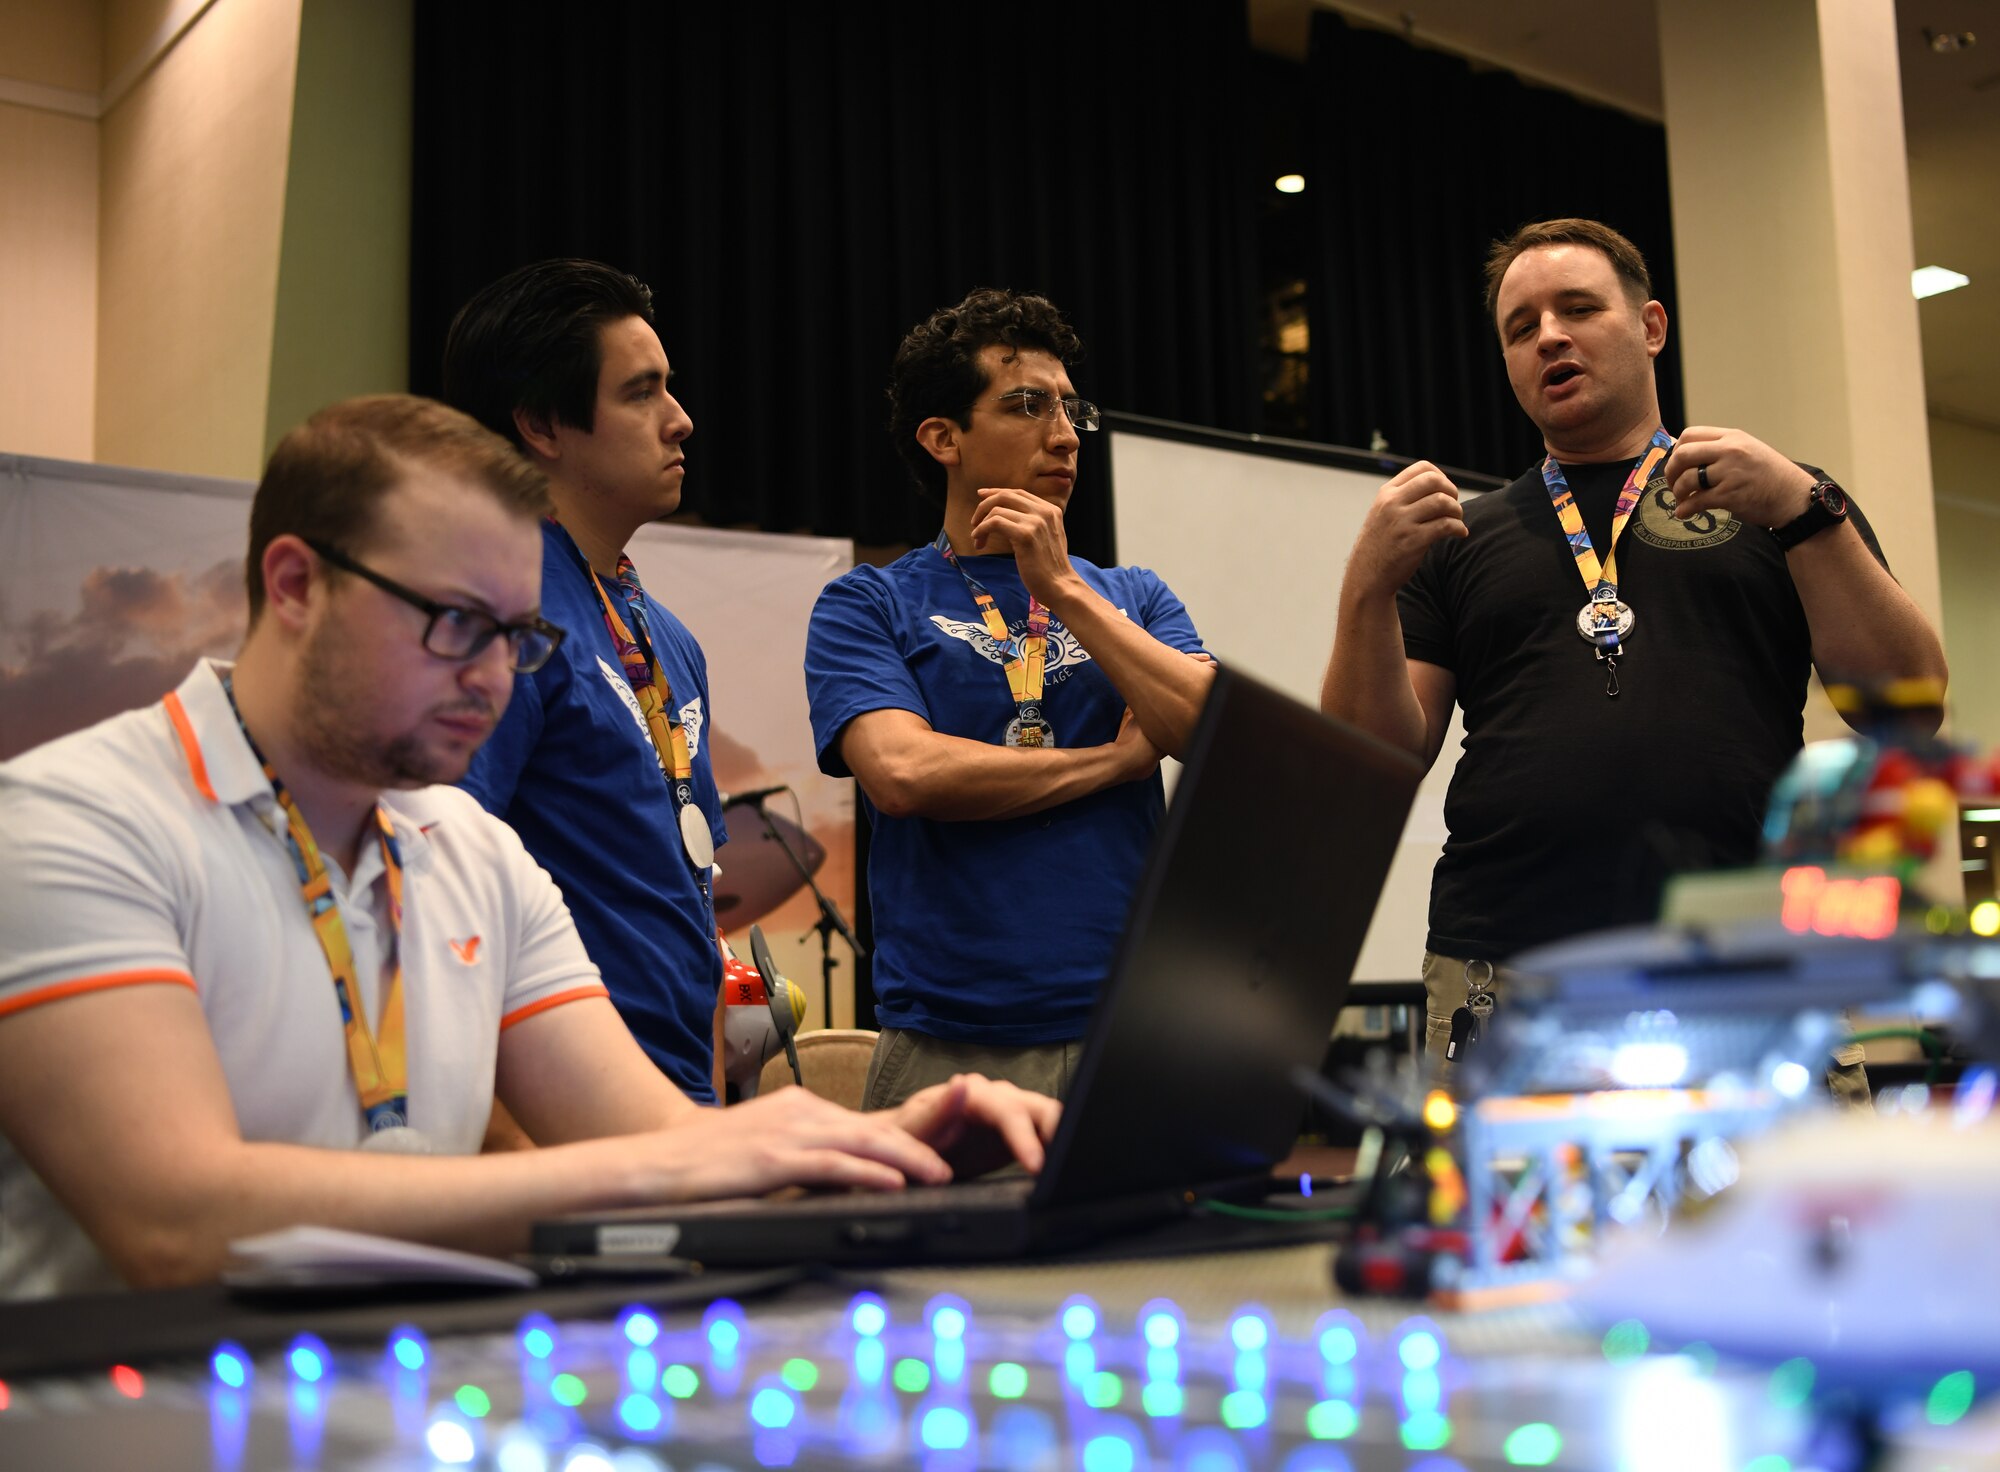 Cody Jackson (right), 90th Cyberspace Operations Squadron constructive modeler, hosts cyber students for a “Bricks in the Loop” presentation at DEF CON 27 Hacking Conference in Las Vegas, Aug. 9, 2019. “Bricks in the Loop” mimics an Air Force installation to simulate real-world cyber systems in training cyber operators. (U.S. Air Force photo by Tech. Sgt. R.J. Biermann)